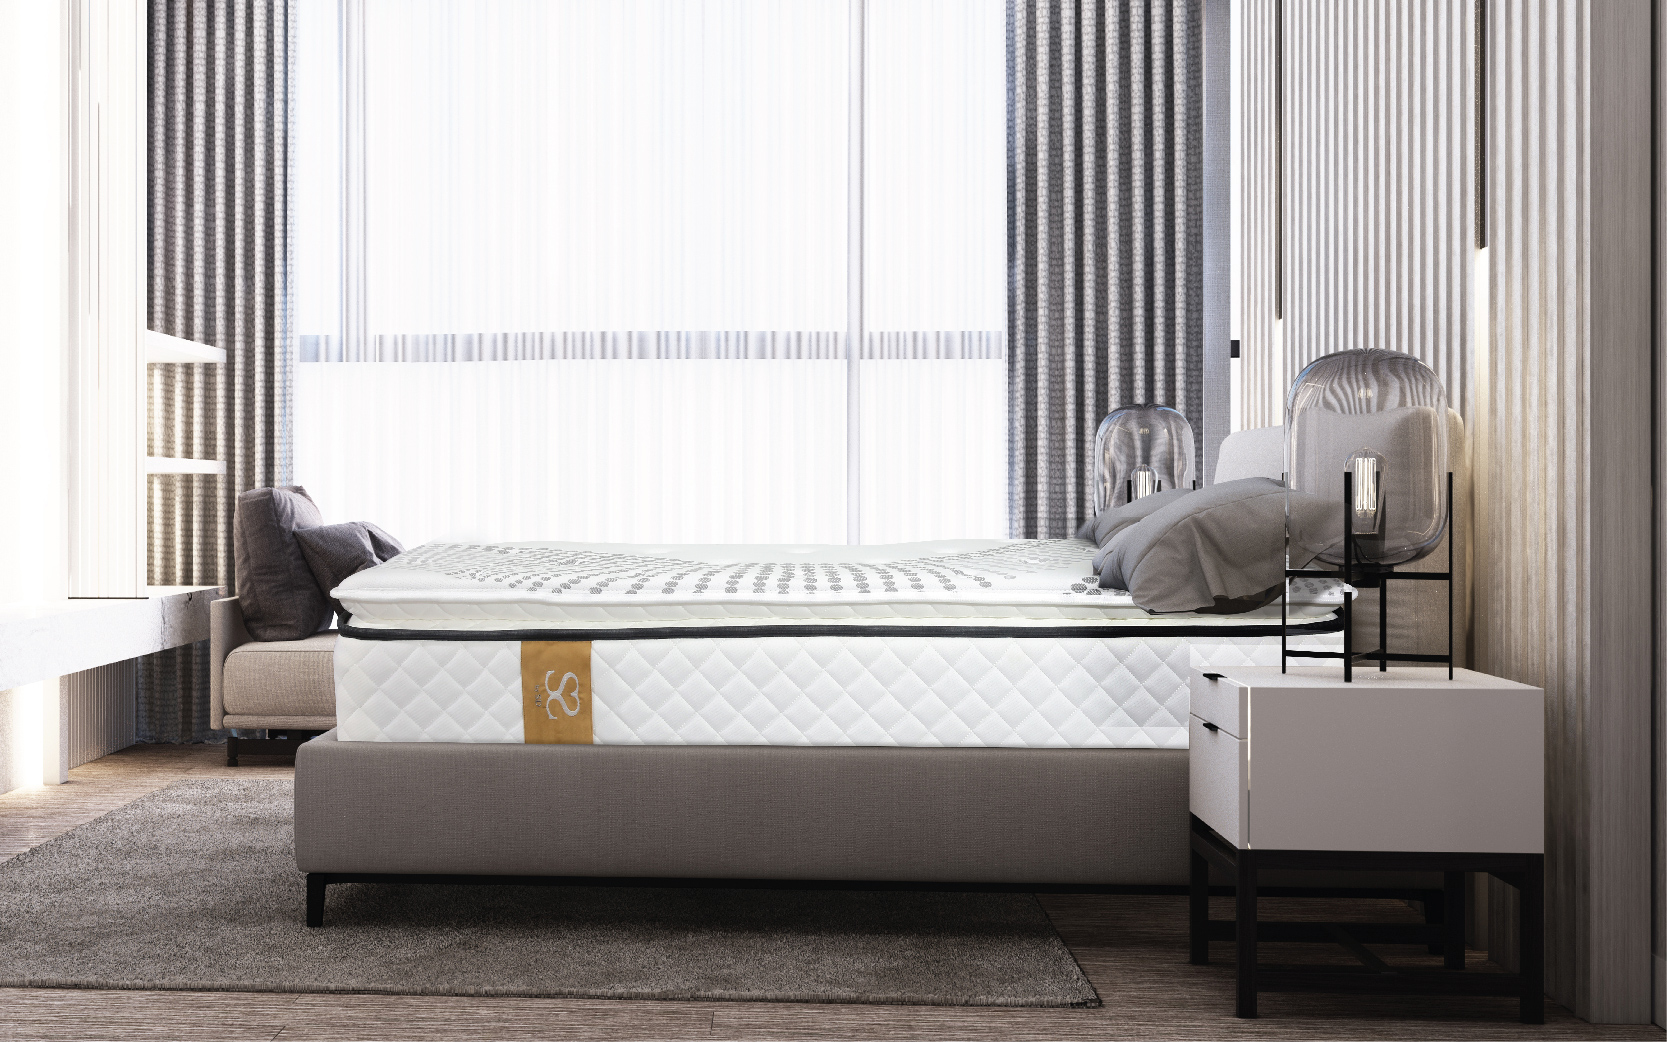 SS Mattress floating internal structure in a brown cosy sleep environment